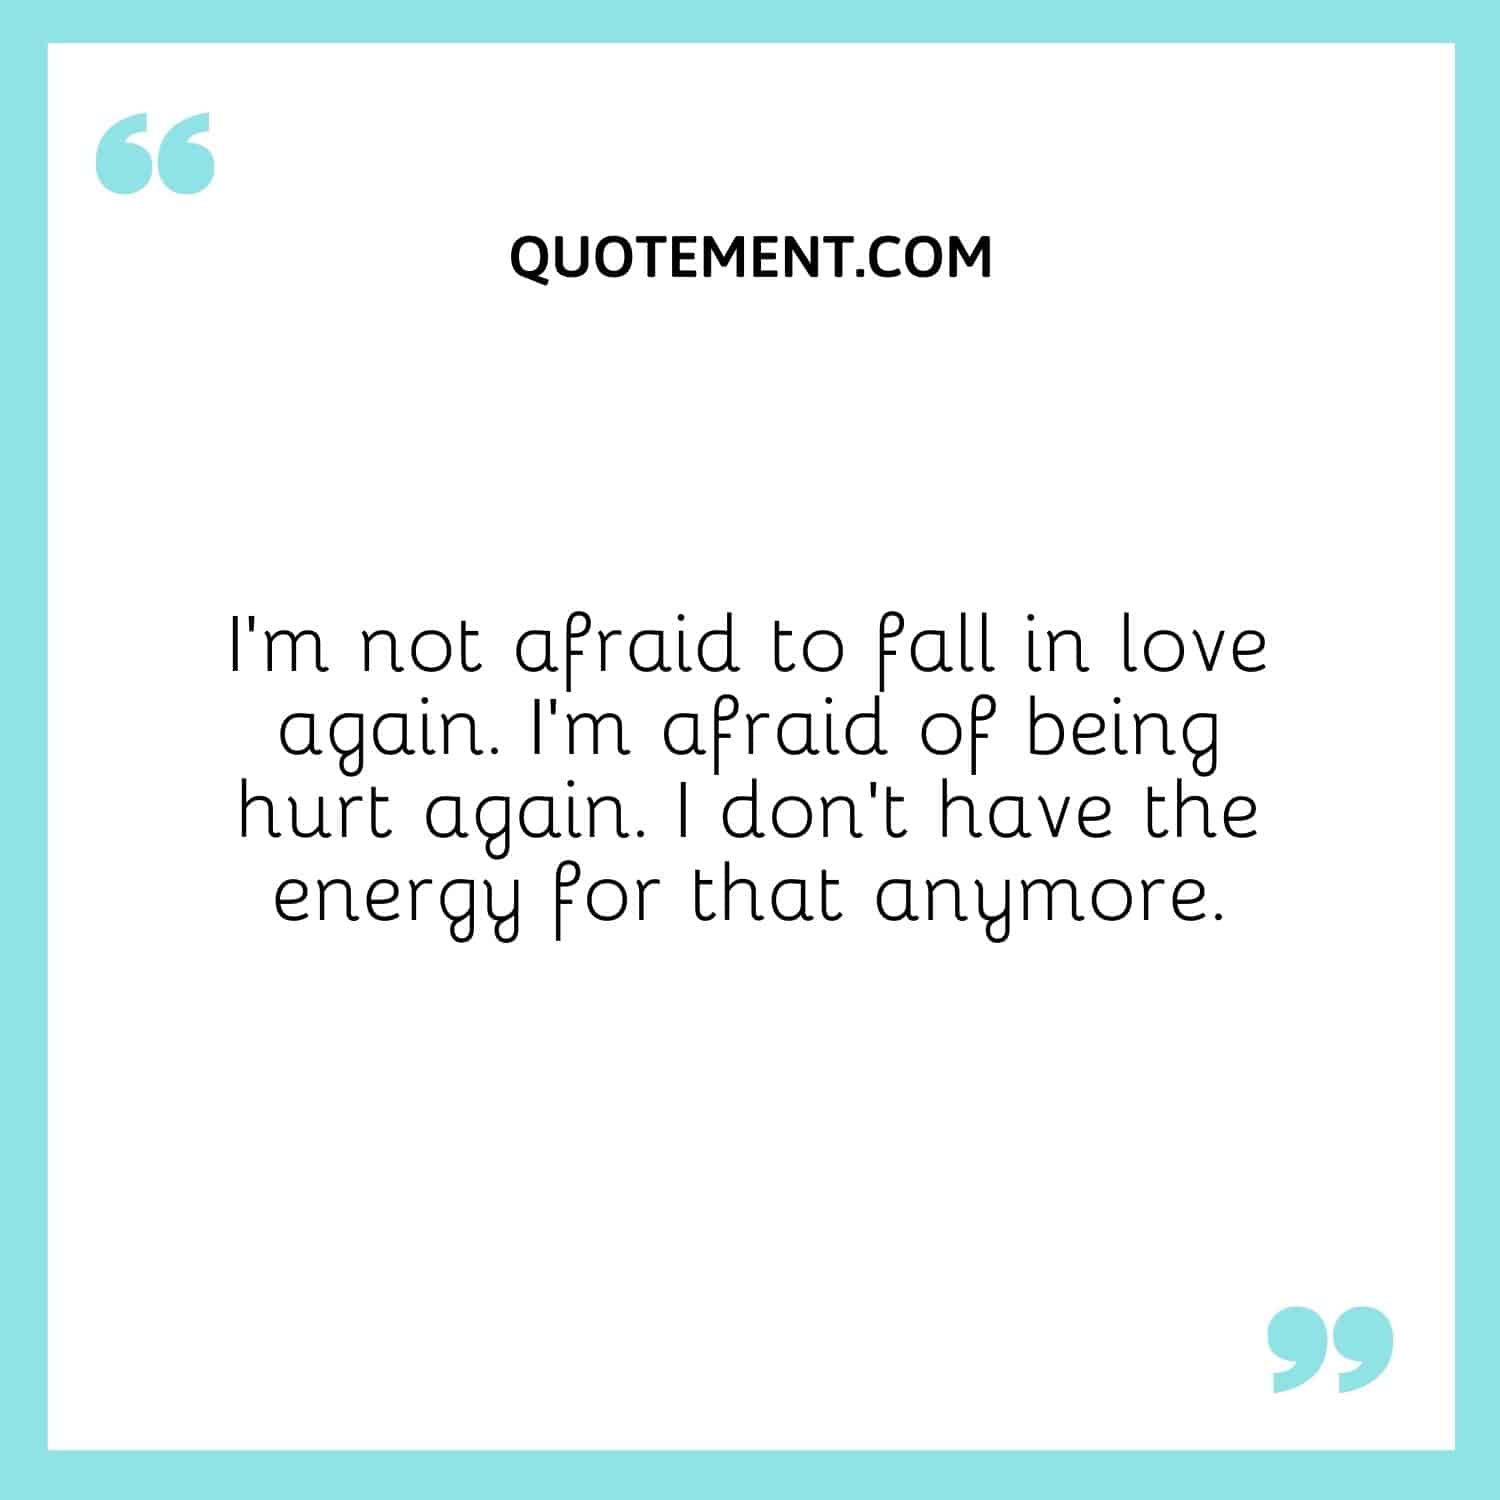 I’m not afraid to fall in love again. I’m afraid of being hurt again. I don’t have the energy for that anymore.